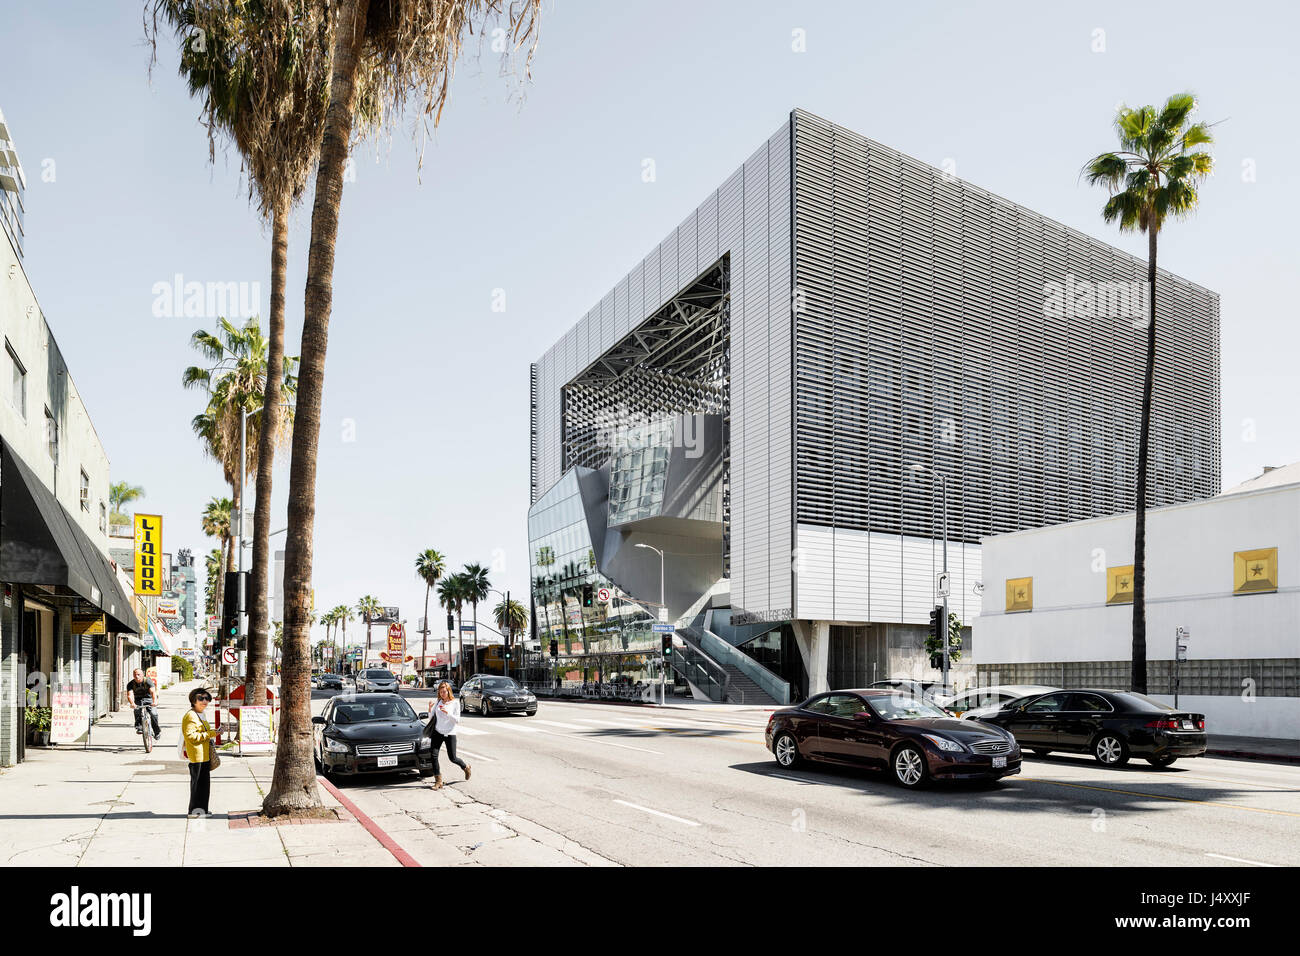 Exterior contextual view on Sunset Boulevard. Emerson College Los Angeles Center, Los Angeles, United States. Architect: Morphosis, 2014. Stock Photo